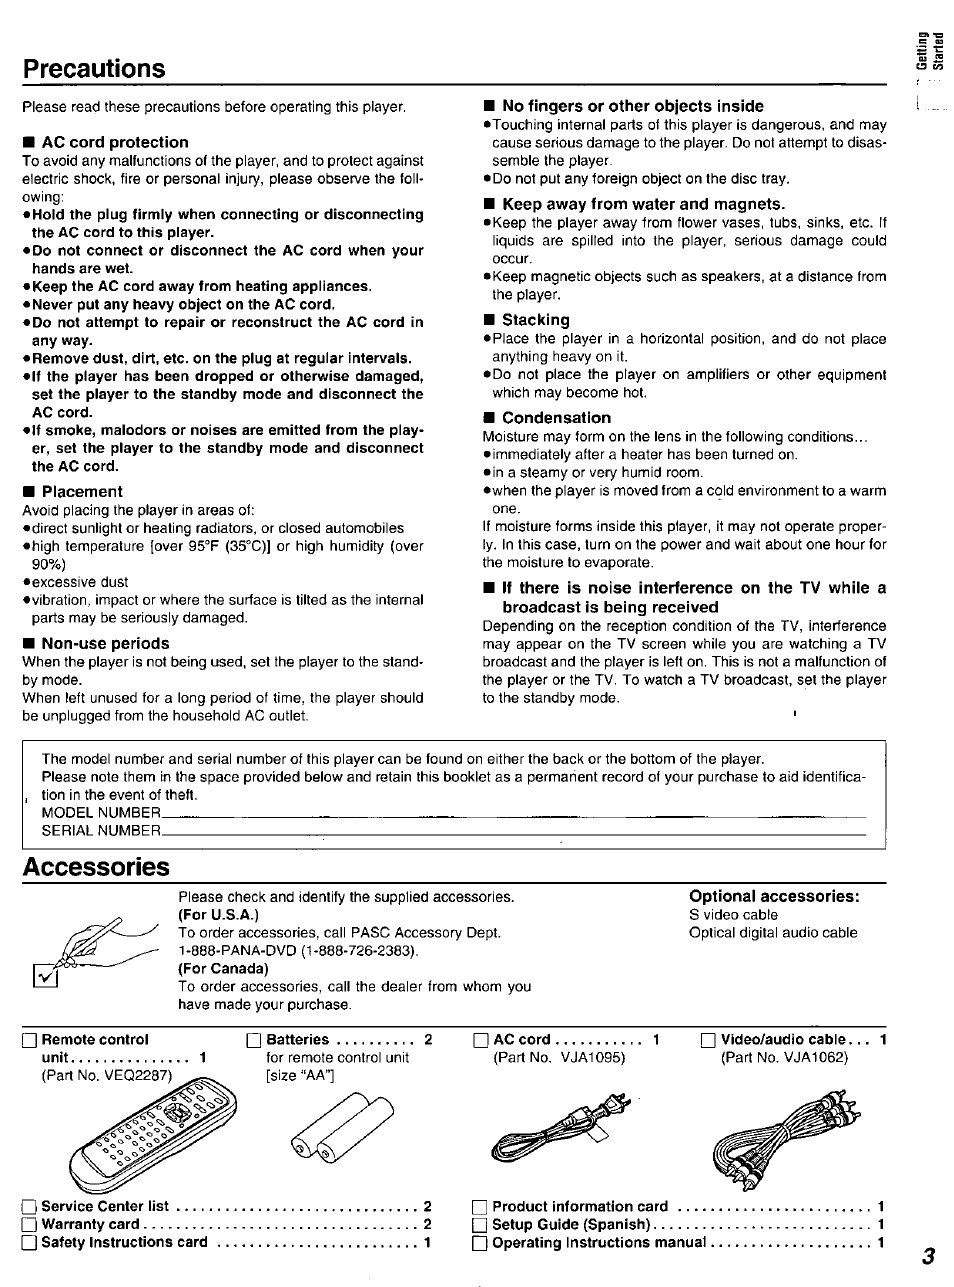 Ac cord protection, Placement, Non-use periods | No fingers or other objects inside, Keep away fronn water and magnets, Stacking, Condensation, Precautions, Accessories | Panasonic DVD-K520D Manuel d'utilisation | Page 3 / 116